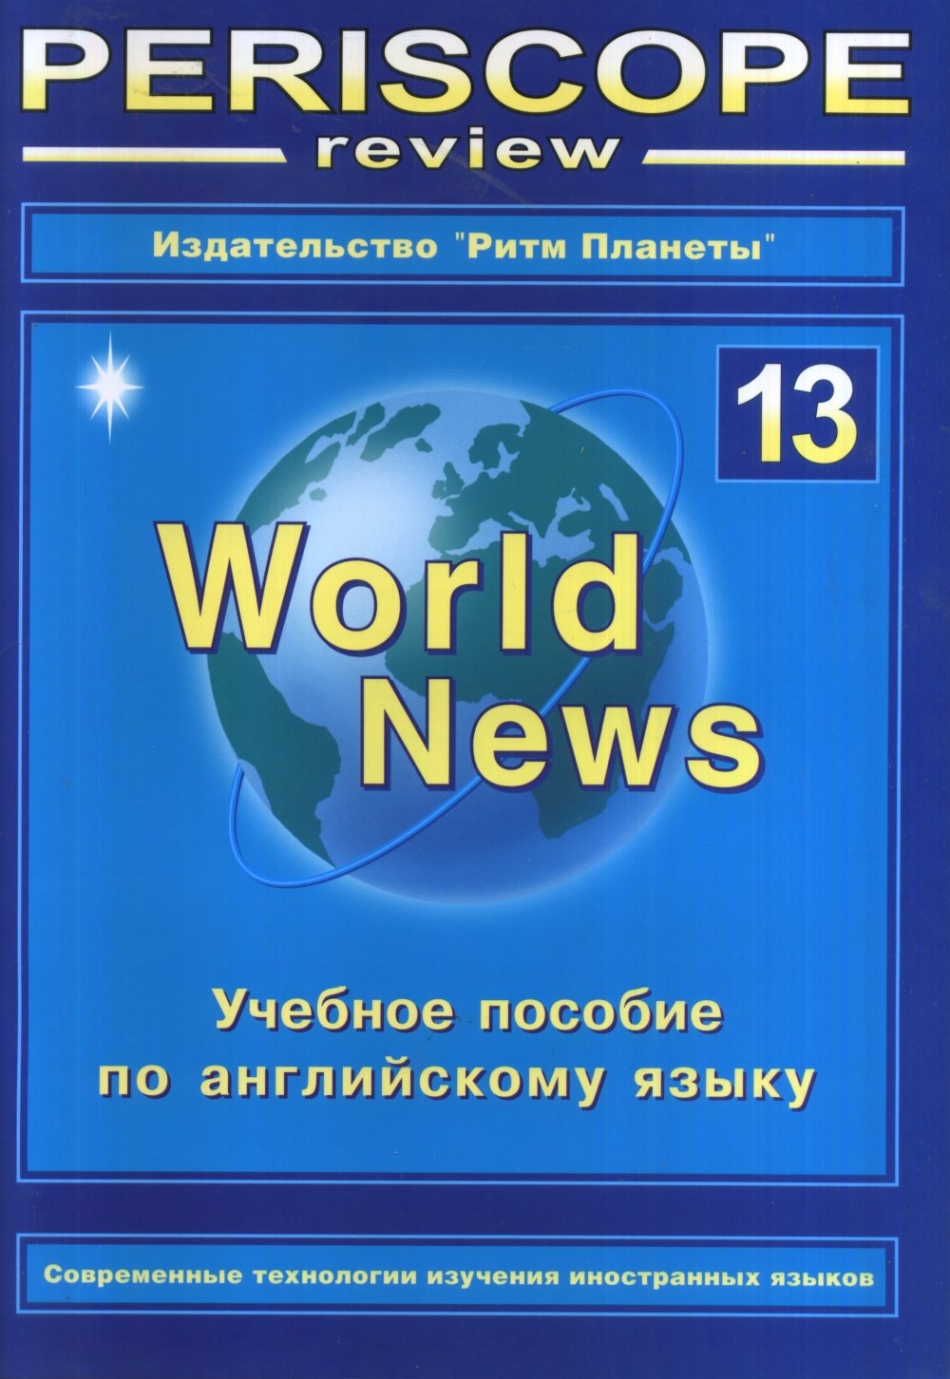  .. Periscope review.      World News  13 